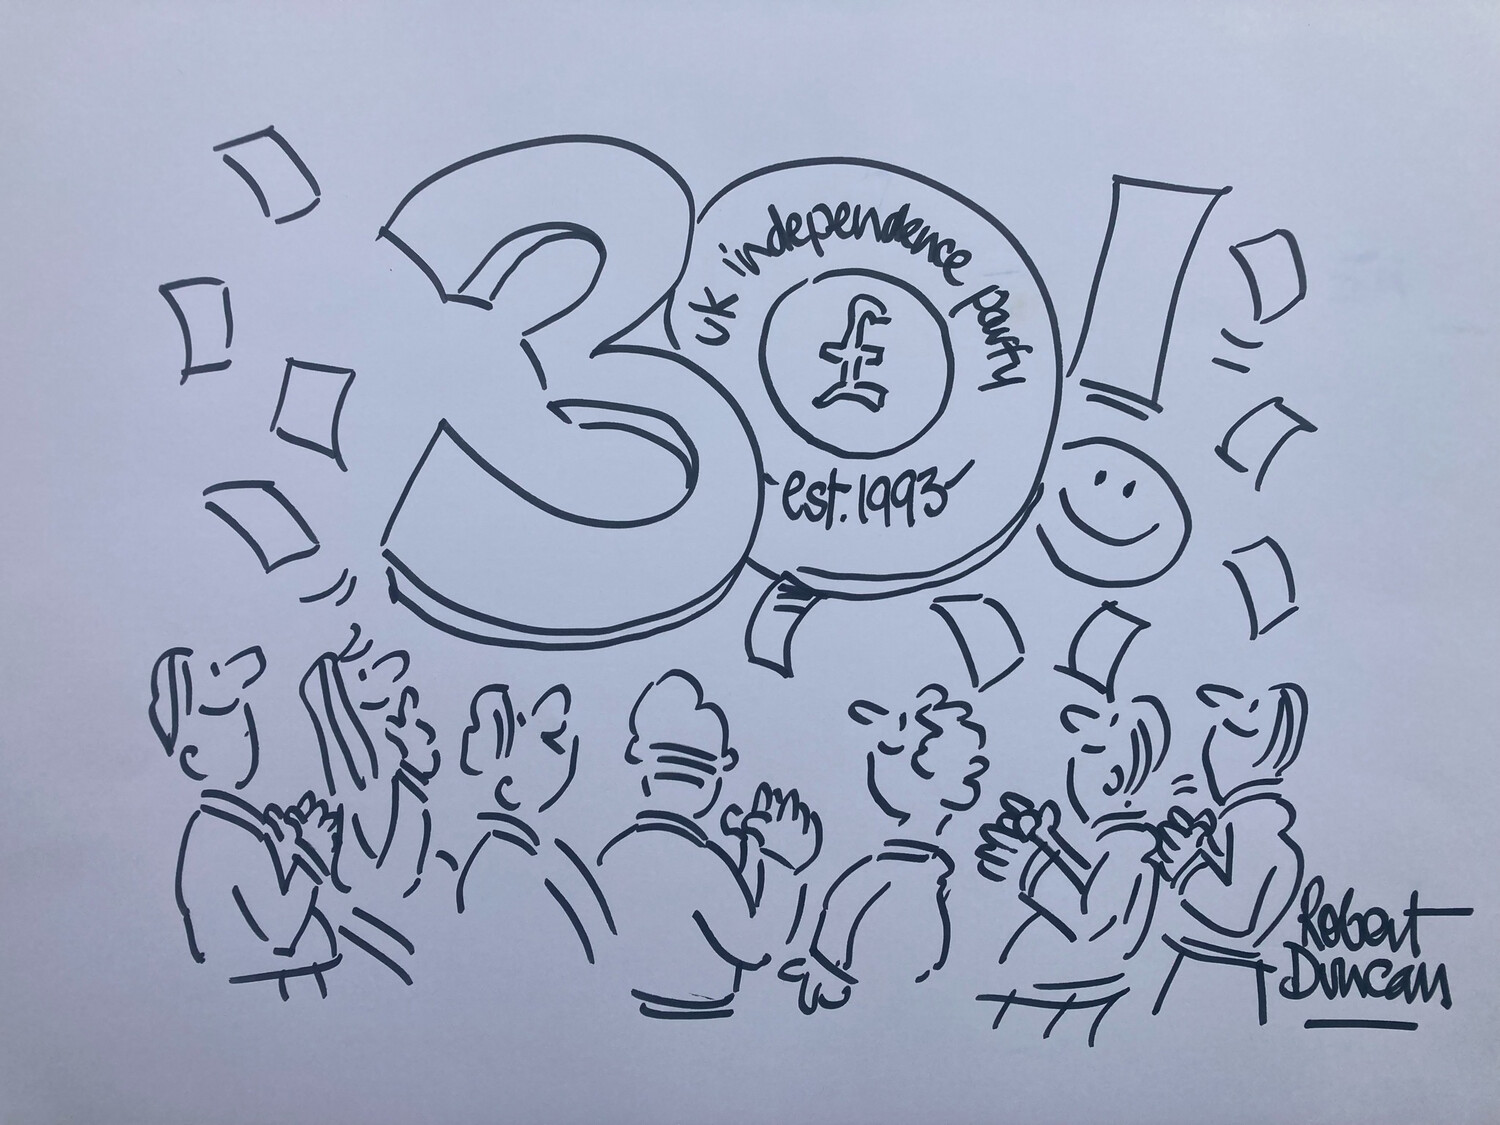 30th Anniversary Conference Sketches